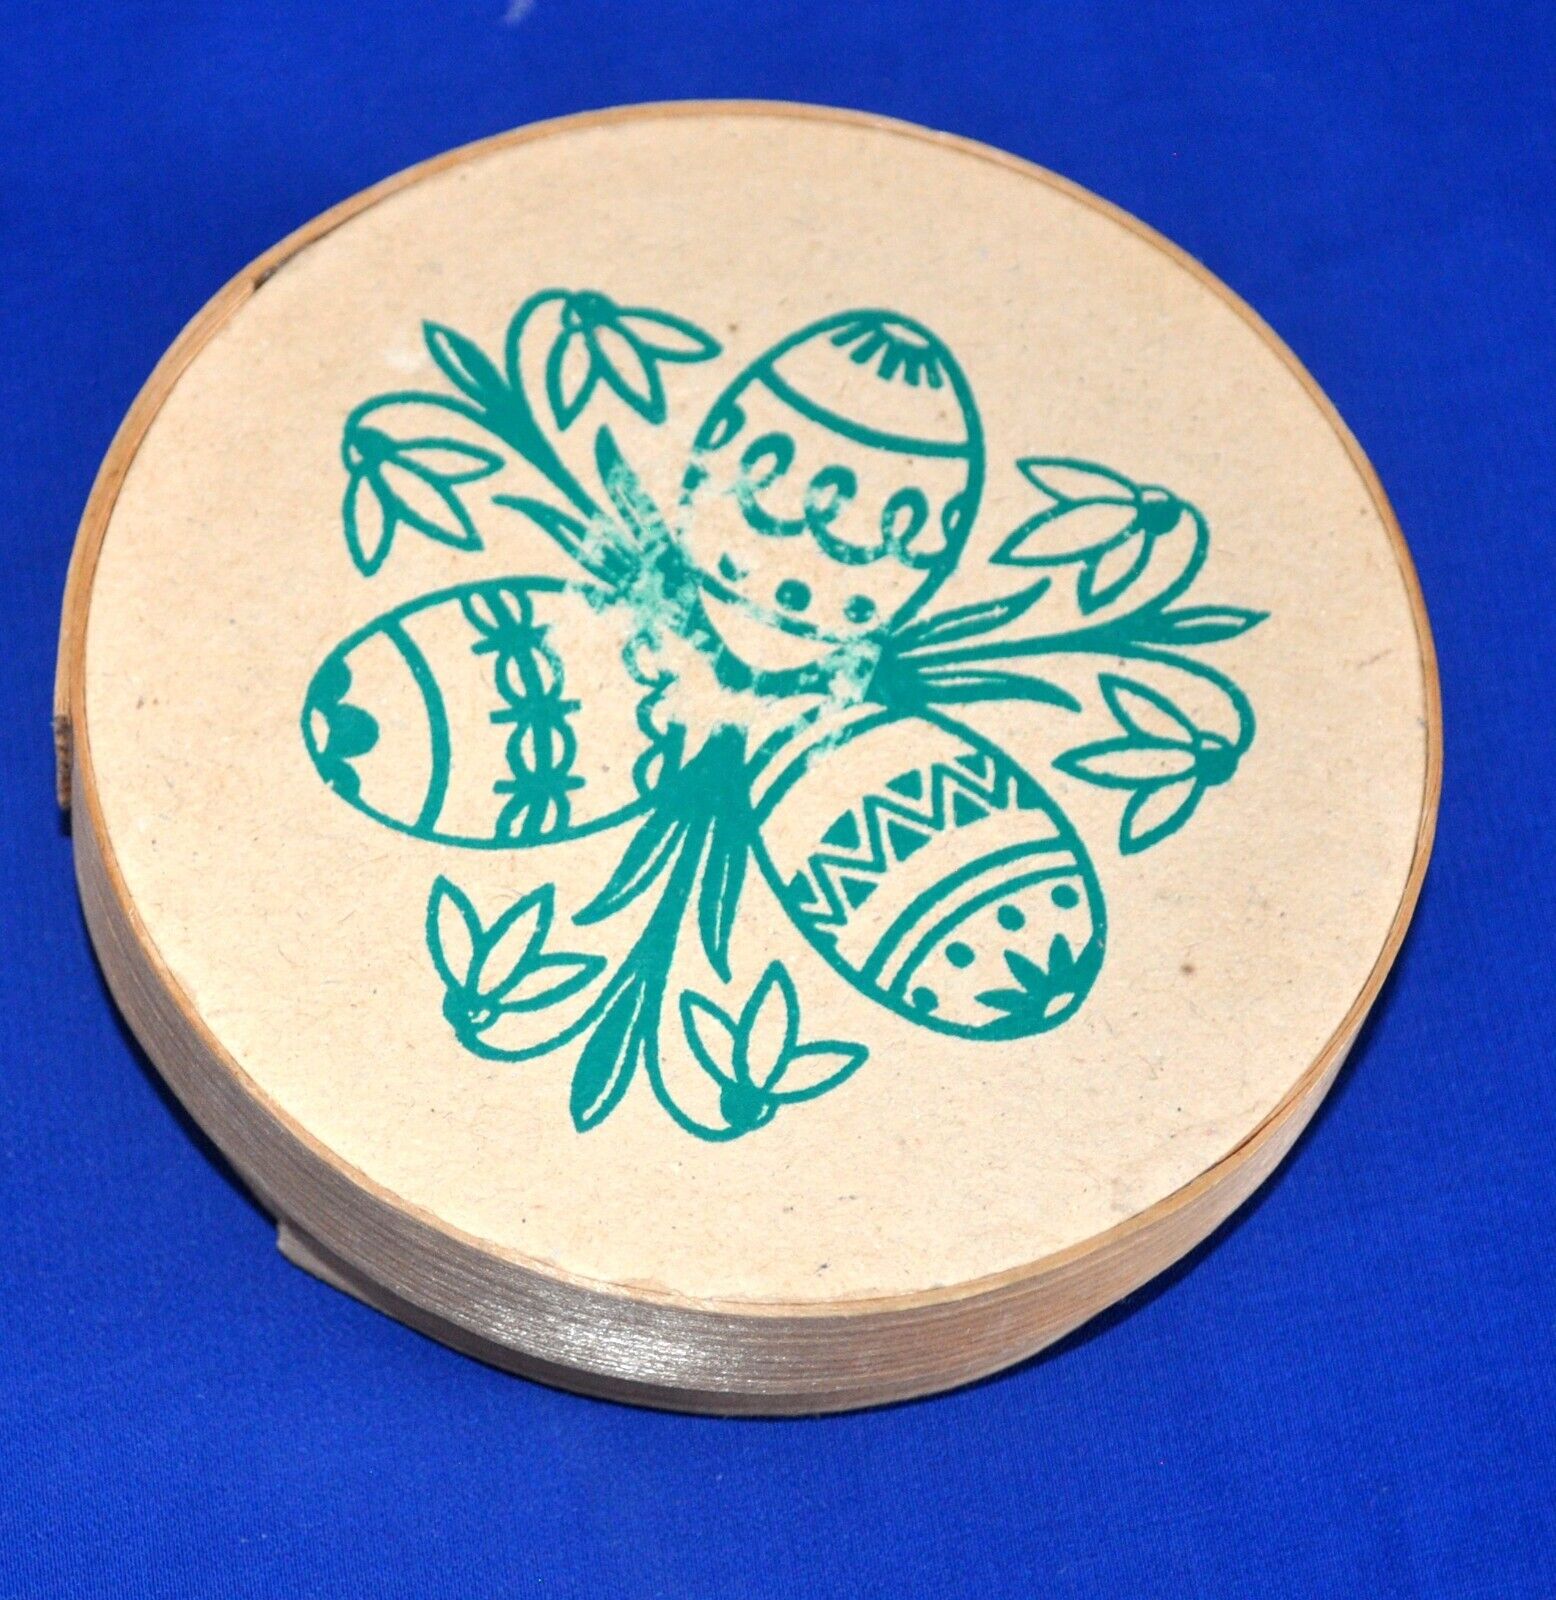 VTG EXPERTIC ERZGEBIRGE EAST GERMANY WOOD CANDY CONTAINER EASTER W LABEL 1960